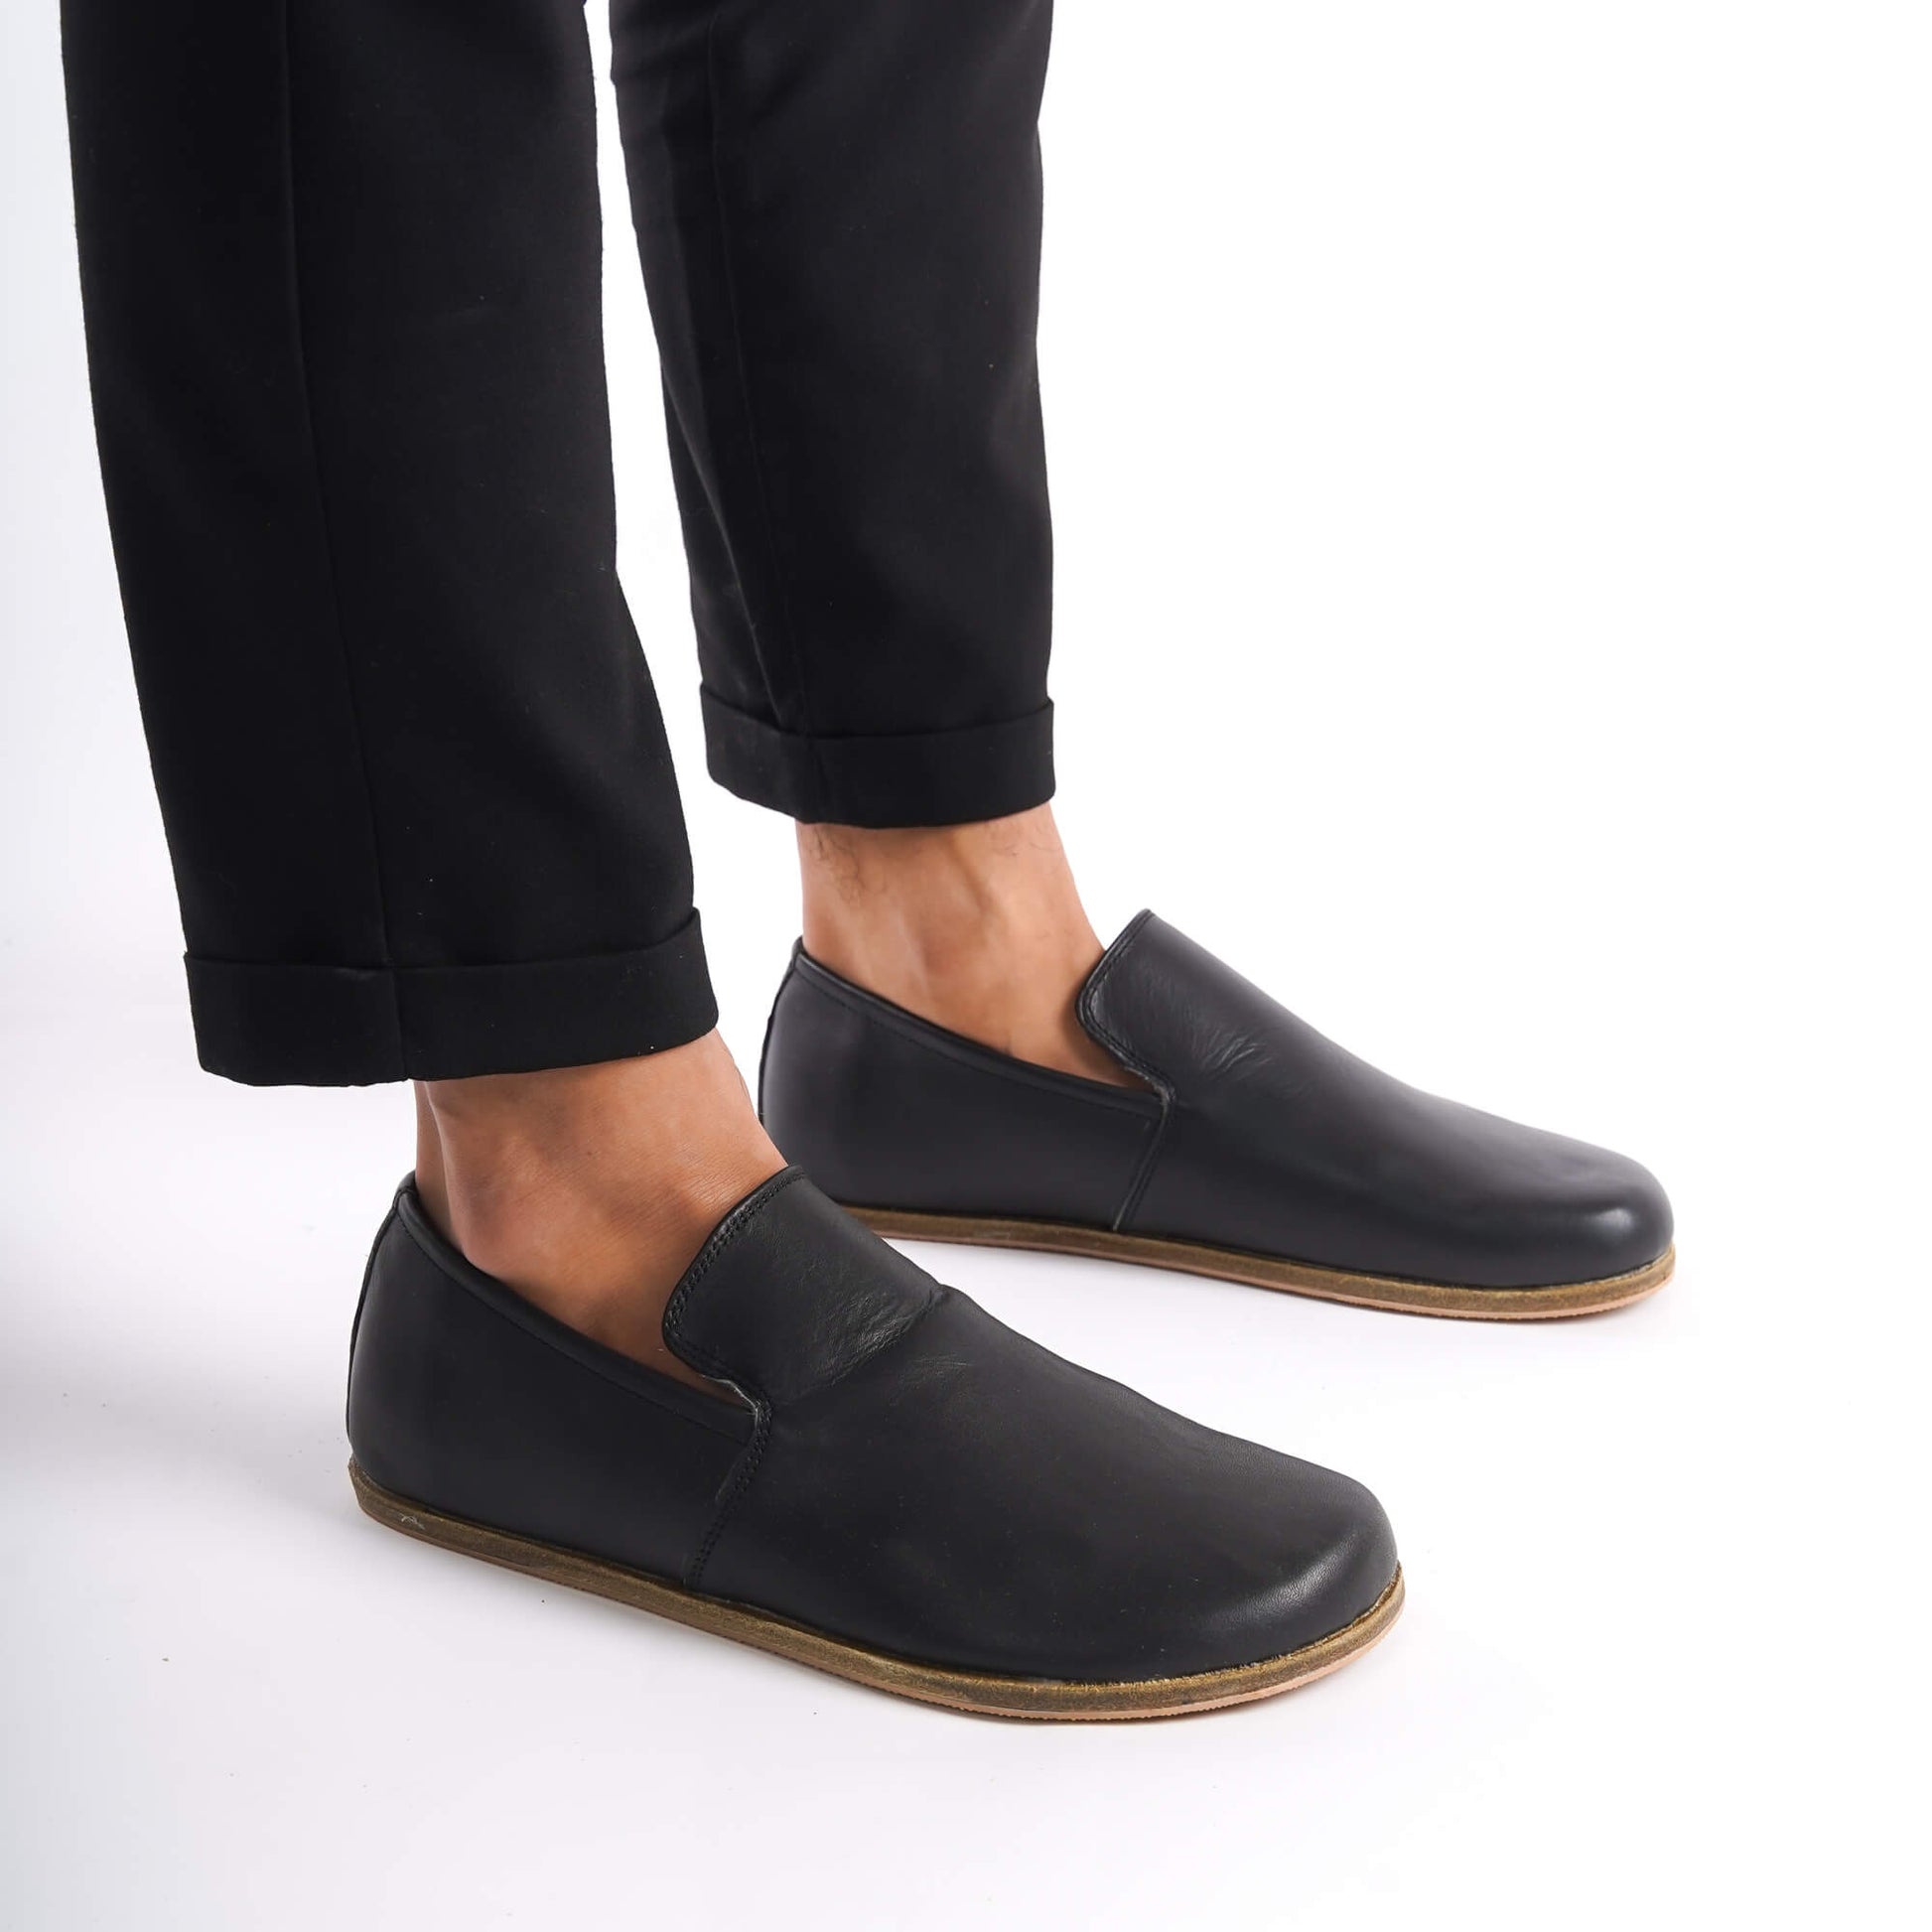 Close-up of Aeolia Leather Barefoot Men Loafers in black worn with black pants - shop at pelanir.com.